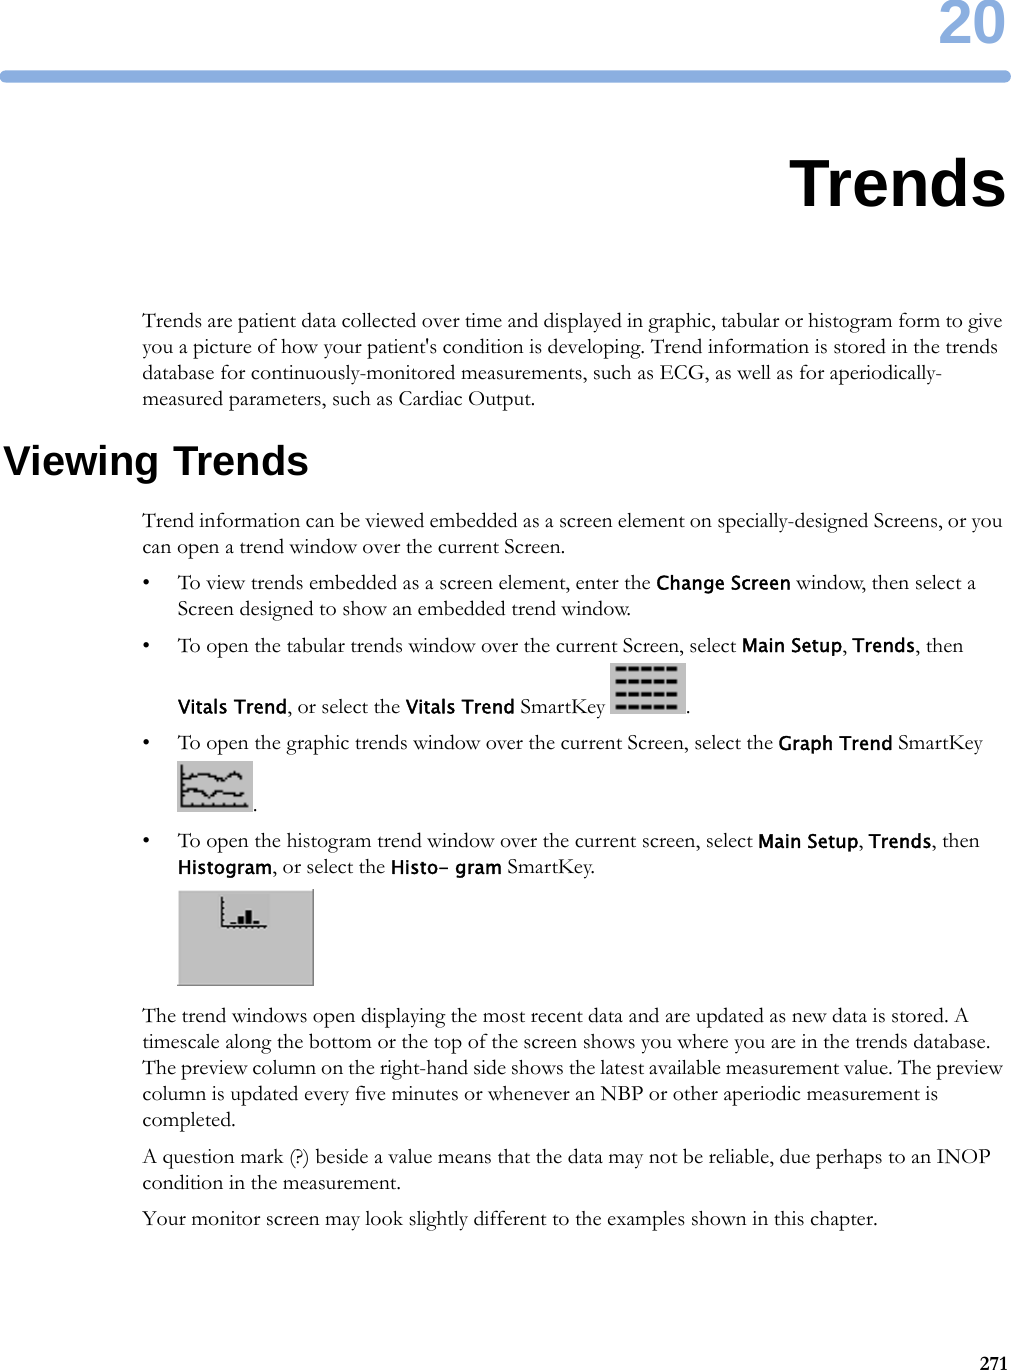 2027120TrendsTrends are patient data collected over time and displayed in graphic, tabular or histogram form to give you a picture of how your patient&apos;s condition is developing. Trend information is stored in the trends database for continuously-monitored measurements, such as ECG, as well as for aperiodically-measured parameters, such as Cardiac Output.Viewing TrendsTrend information can be viewed embedded as a screen element on specially-designed Screens, or you can open a trend window over the current Screen.• To view trends embedded as a screen element, enter the Change Screen window, then select a Screen designed to show an embedded trend window.• To open the tabular trends window over the current Screen, select Main Setup, Trends, then Vitals Trend, or select the Vitals Trend SmartKey  .• To open the graphic trends window over the current Screen, select the Graph Trend SmartKey .• To open the histogram trend window over the current screen, select Main Setup, Trends, then Histogram, or select the Histo- gram SmartKey.The trend windows open displaying the most recent data and are updated as new data is stored. A timescale along the bottom or the top of the screen shows you where you are in the trends database. The preview column on the right-hand side shows the latest available measurement value. The preview column is updated every five minutes or whenever an NBP or other aperiodic measurement is completed.A question mark (?) beside a value means that the data may not be reliable, due perhaps to an INOP condition in the measurement.Your monitor screen may look slightly different to the examples shown in this chapter.